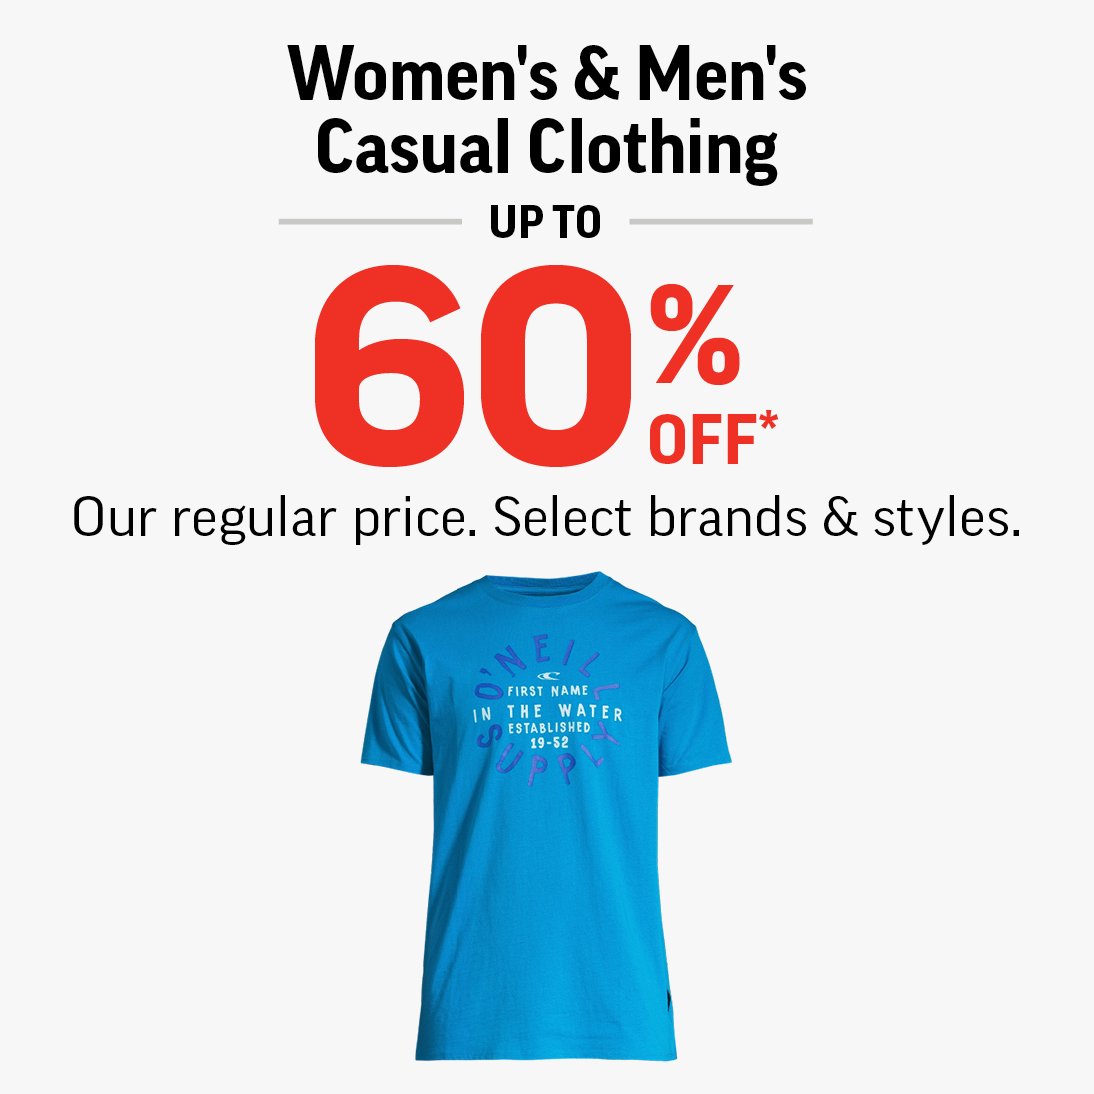 WOMEN'S & MEN'S CASUAL CLOTHING UP TO 60% OFF